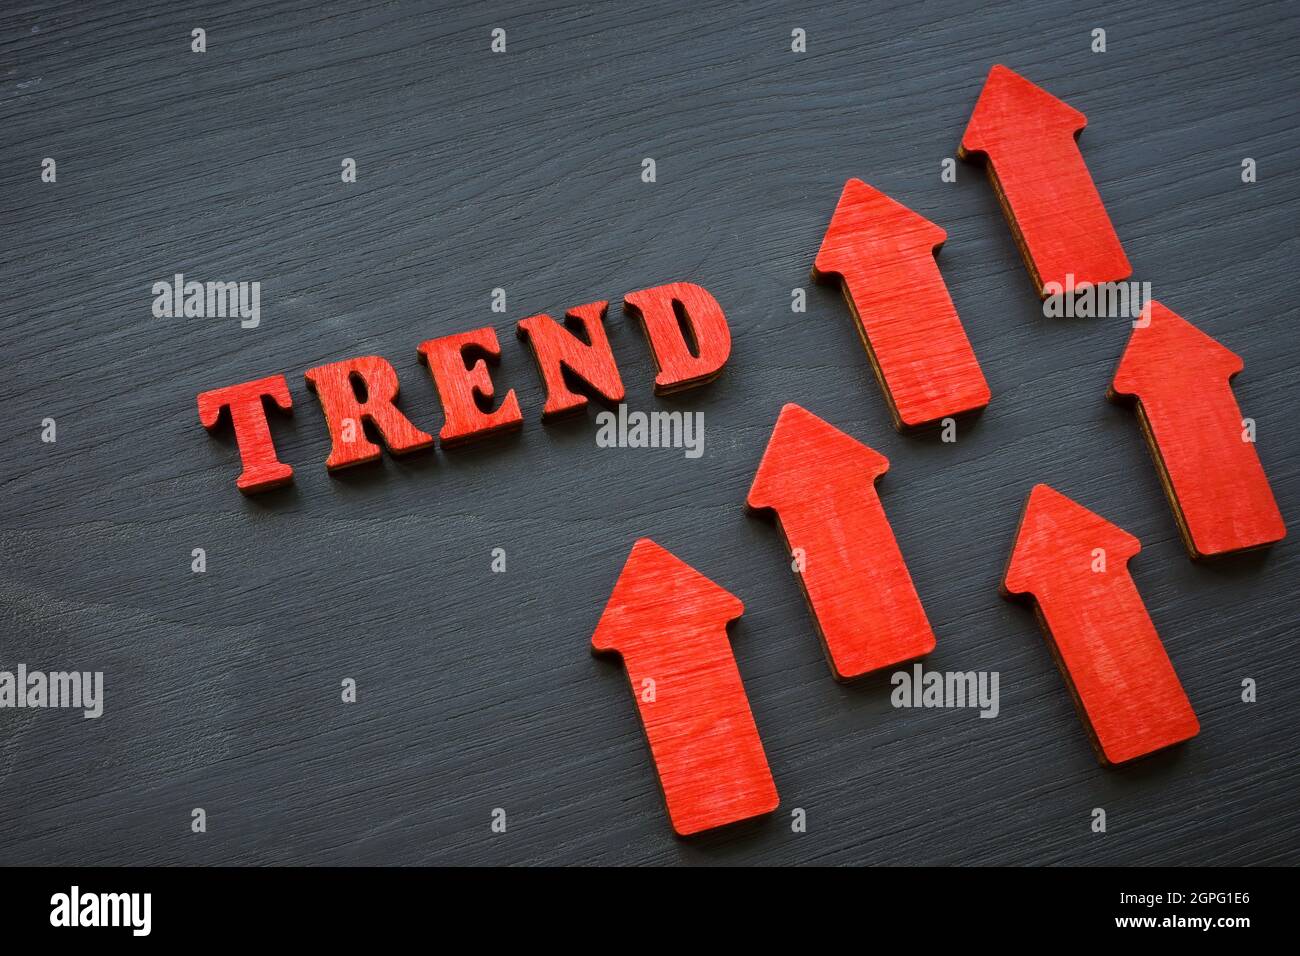 Modern trend word and red rising arrows. Stock Photo